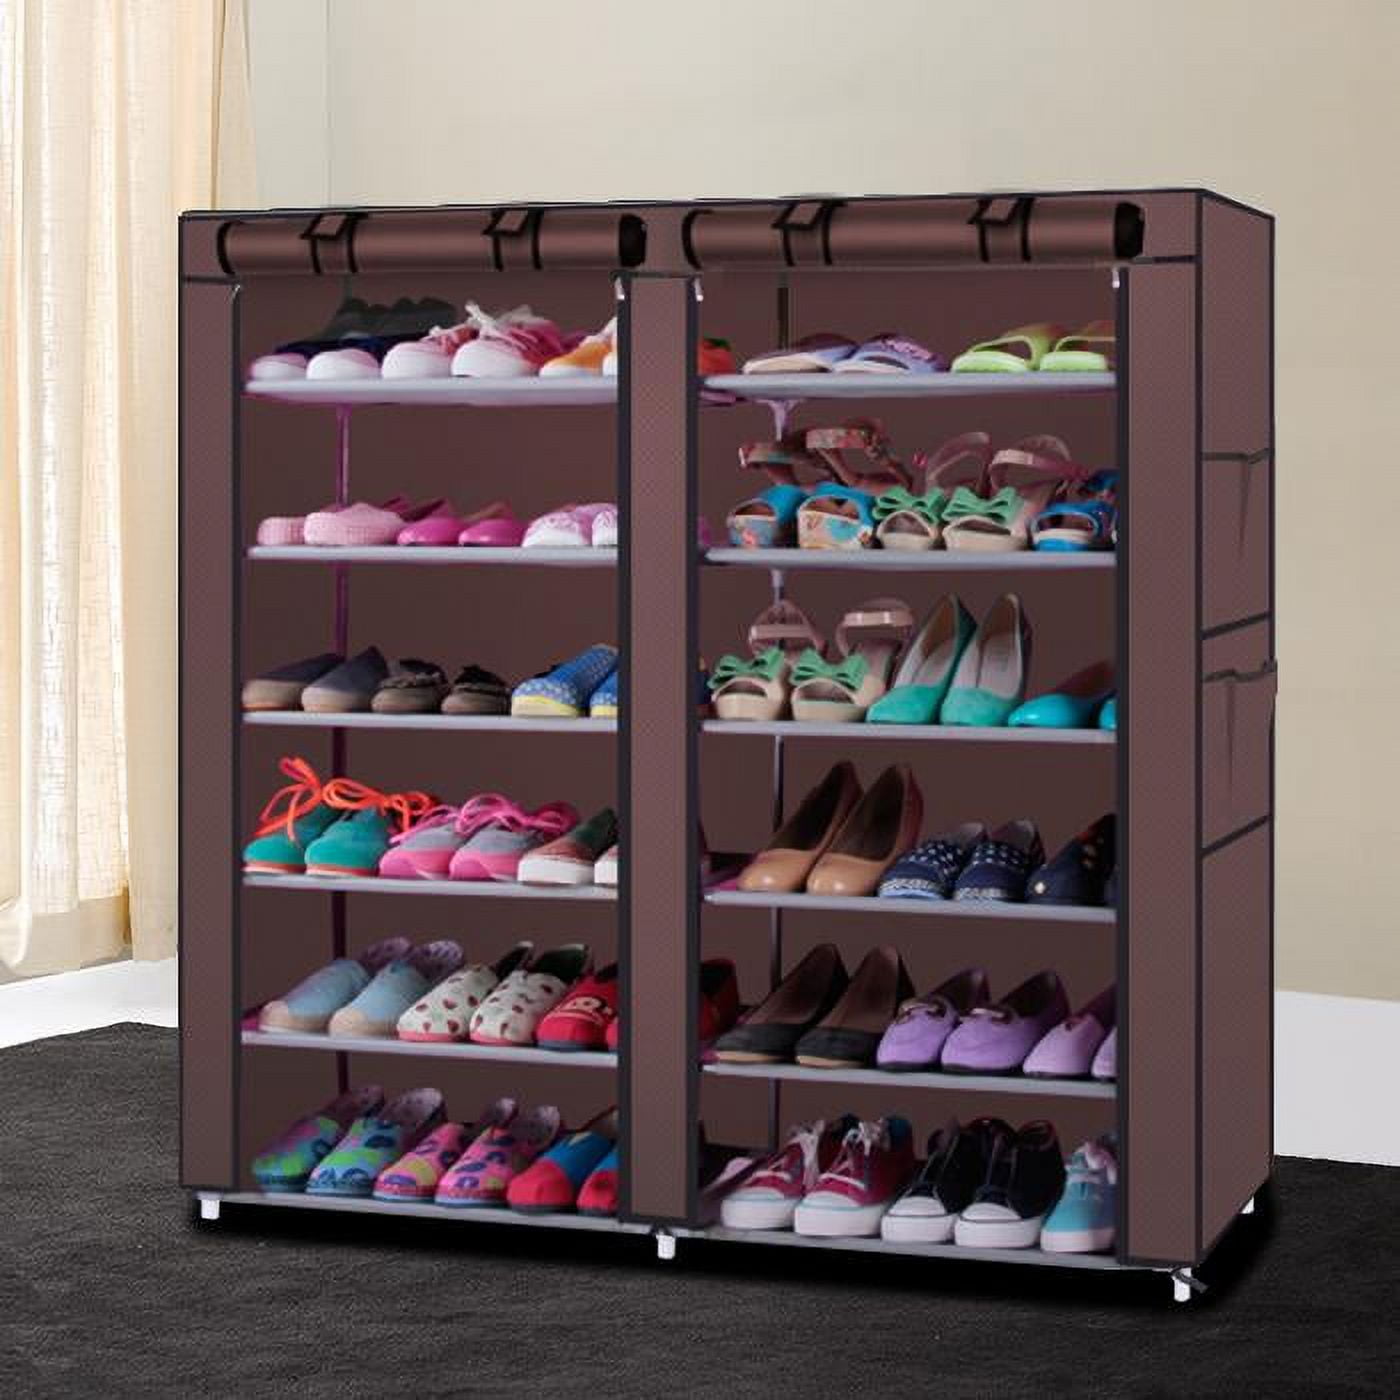 Ktaxon 6-Tier Metal Sturdy Shoe Rack Shelf Shoe Tower Stand 30- Pairs Shoe  Storage Cabinet Organizer for Closet Entryway Bedroom Living Room Home,  Black Finish 